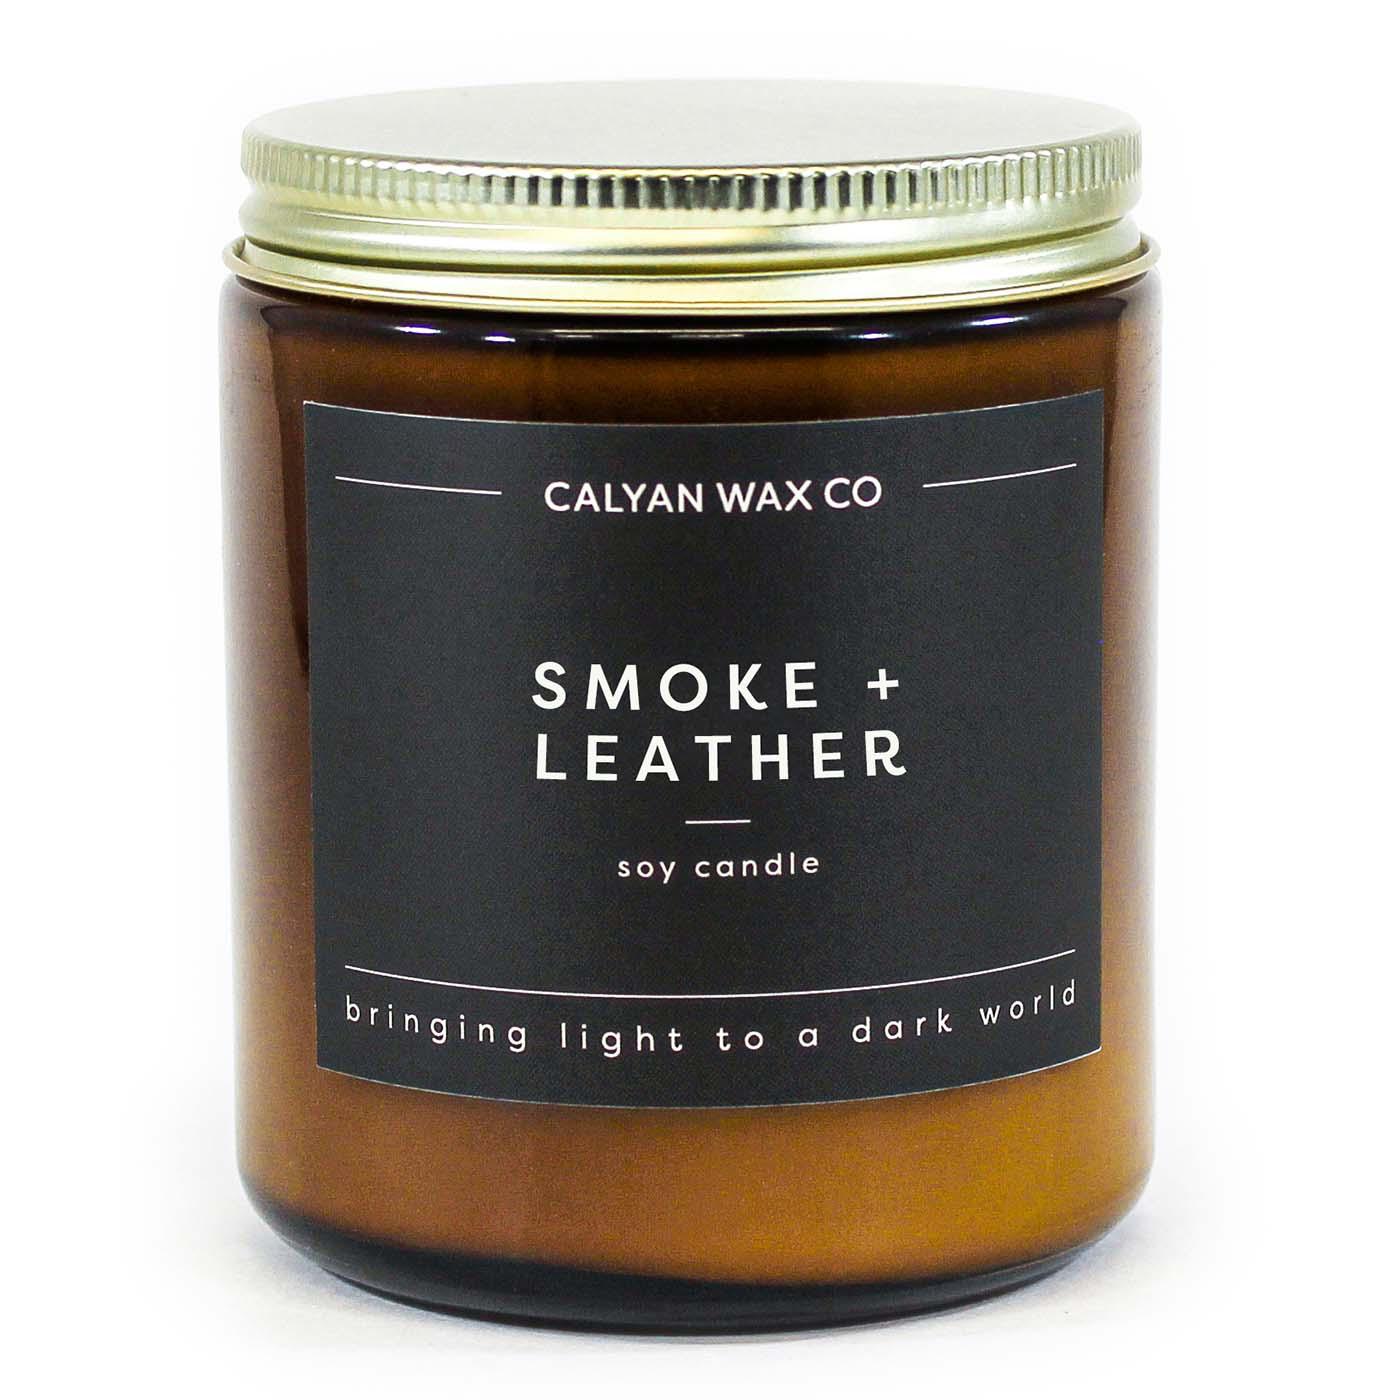 Calyan Wax Co. Smoke + Leather Scented Soy Candle; image 1 of 3